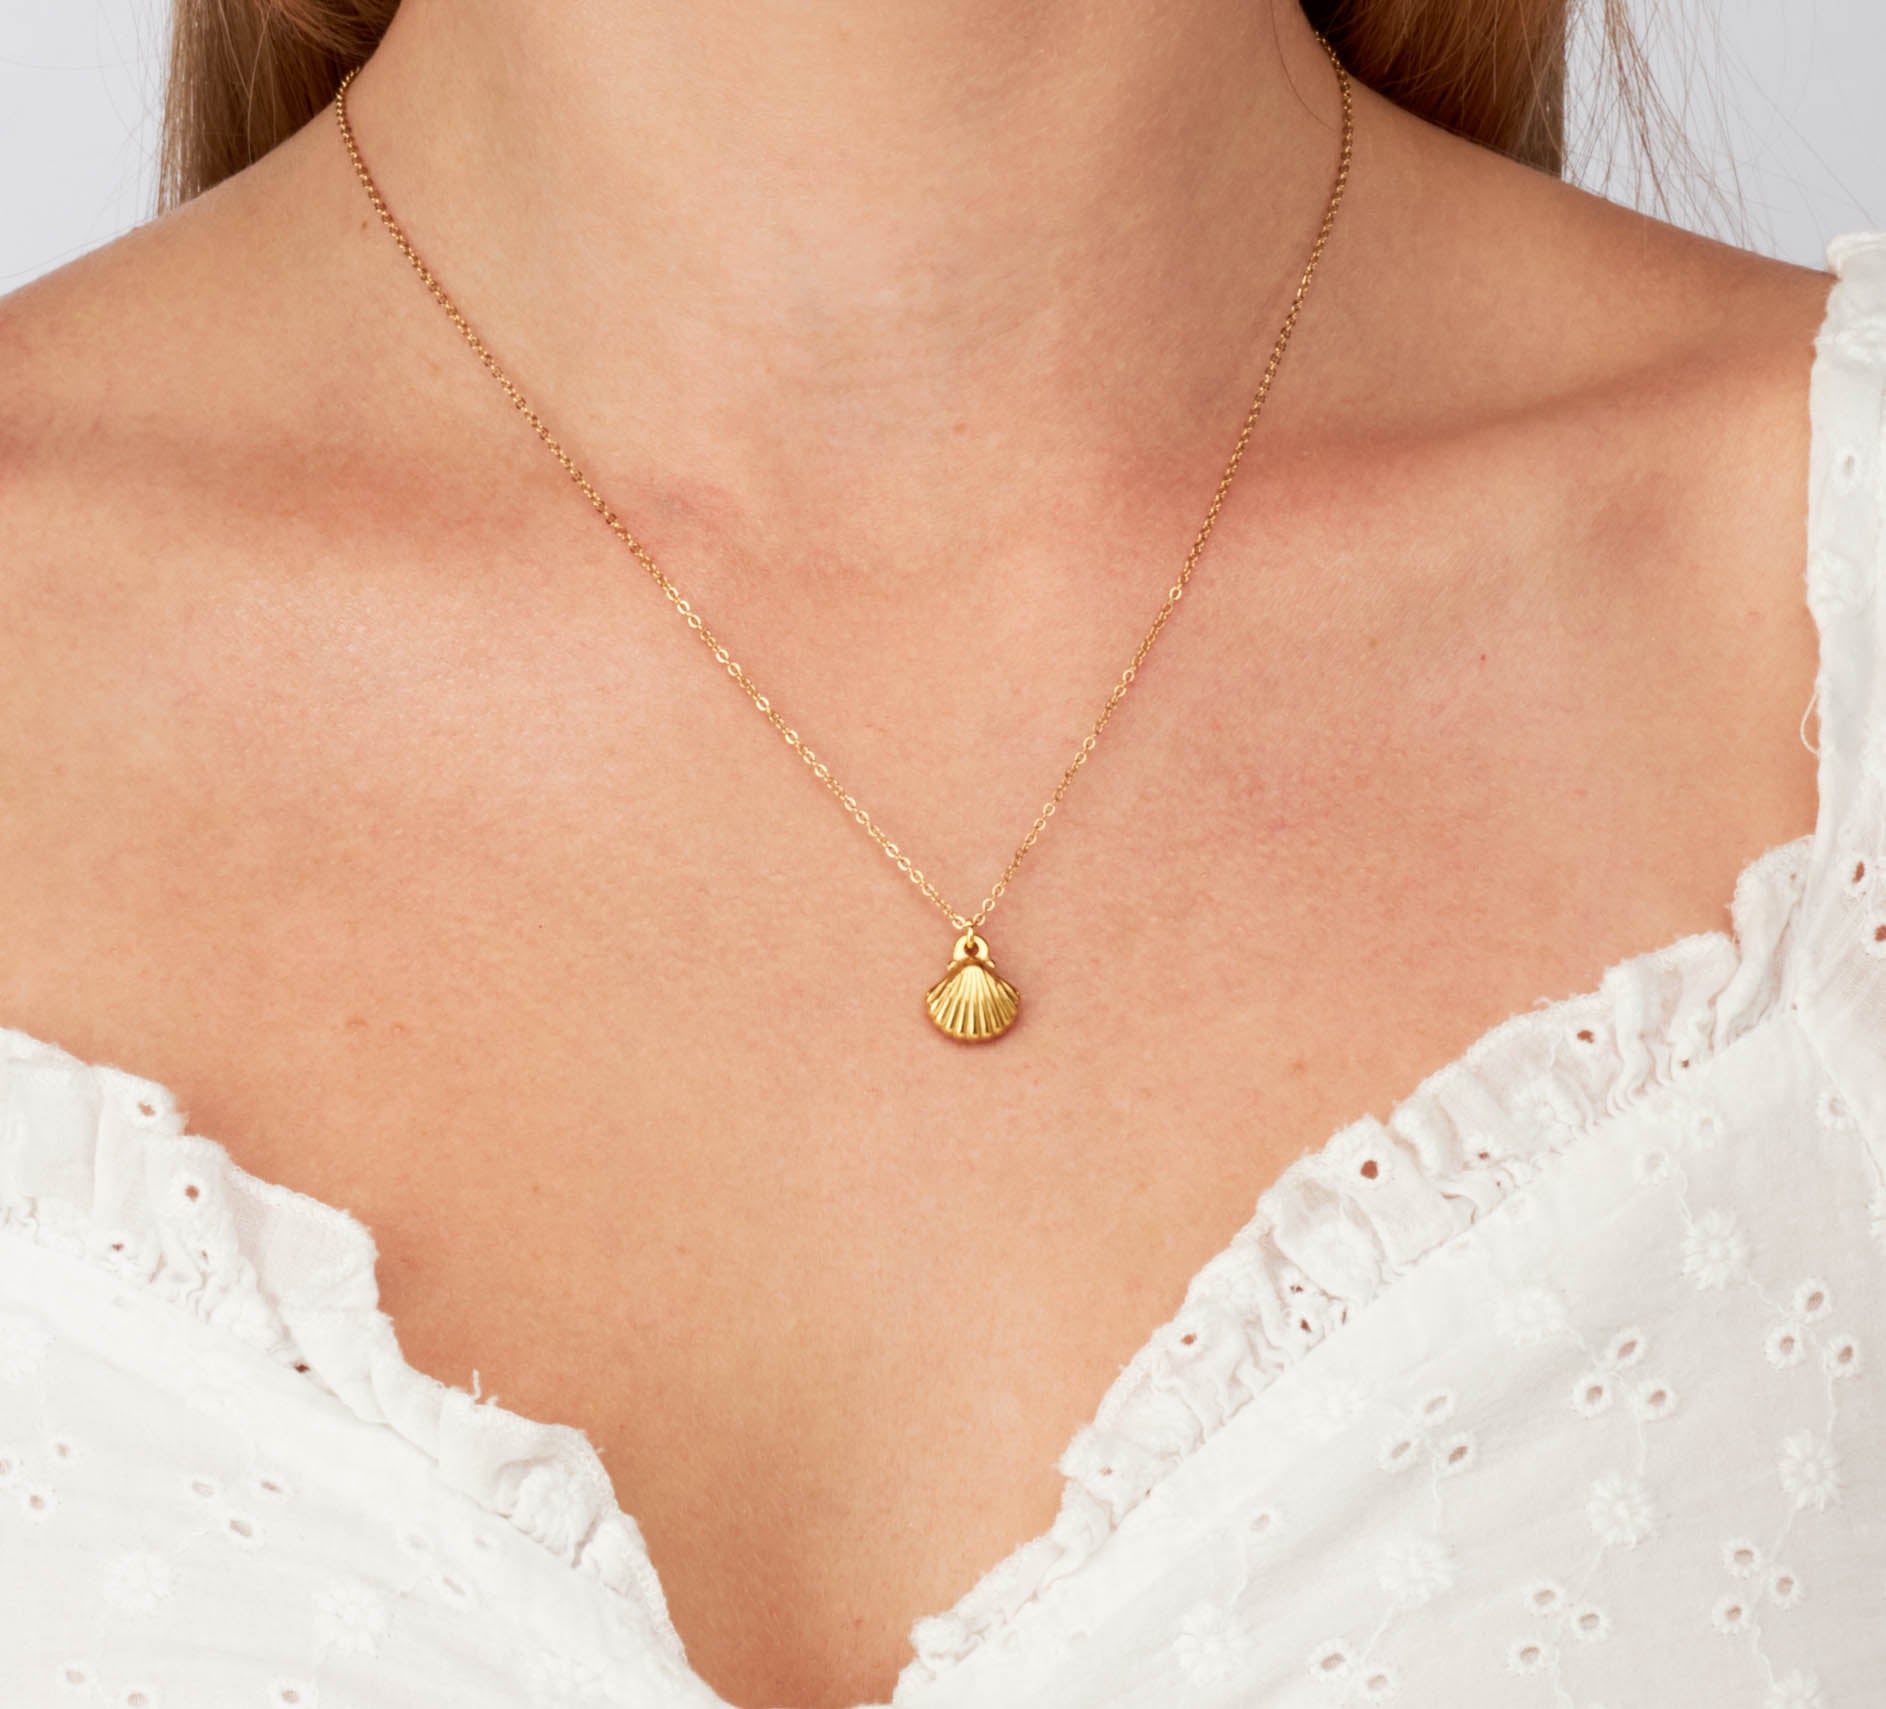 Shell - 18k Gold Necklace - Ocean Wave Jewelry